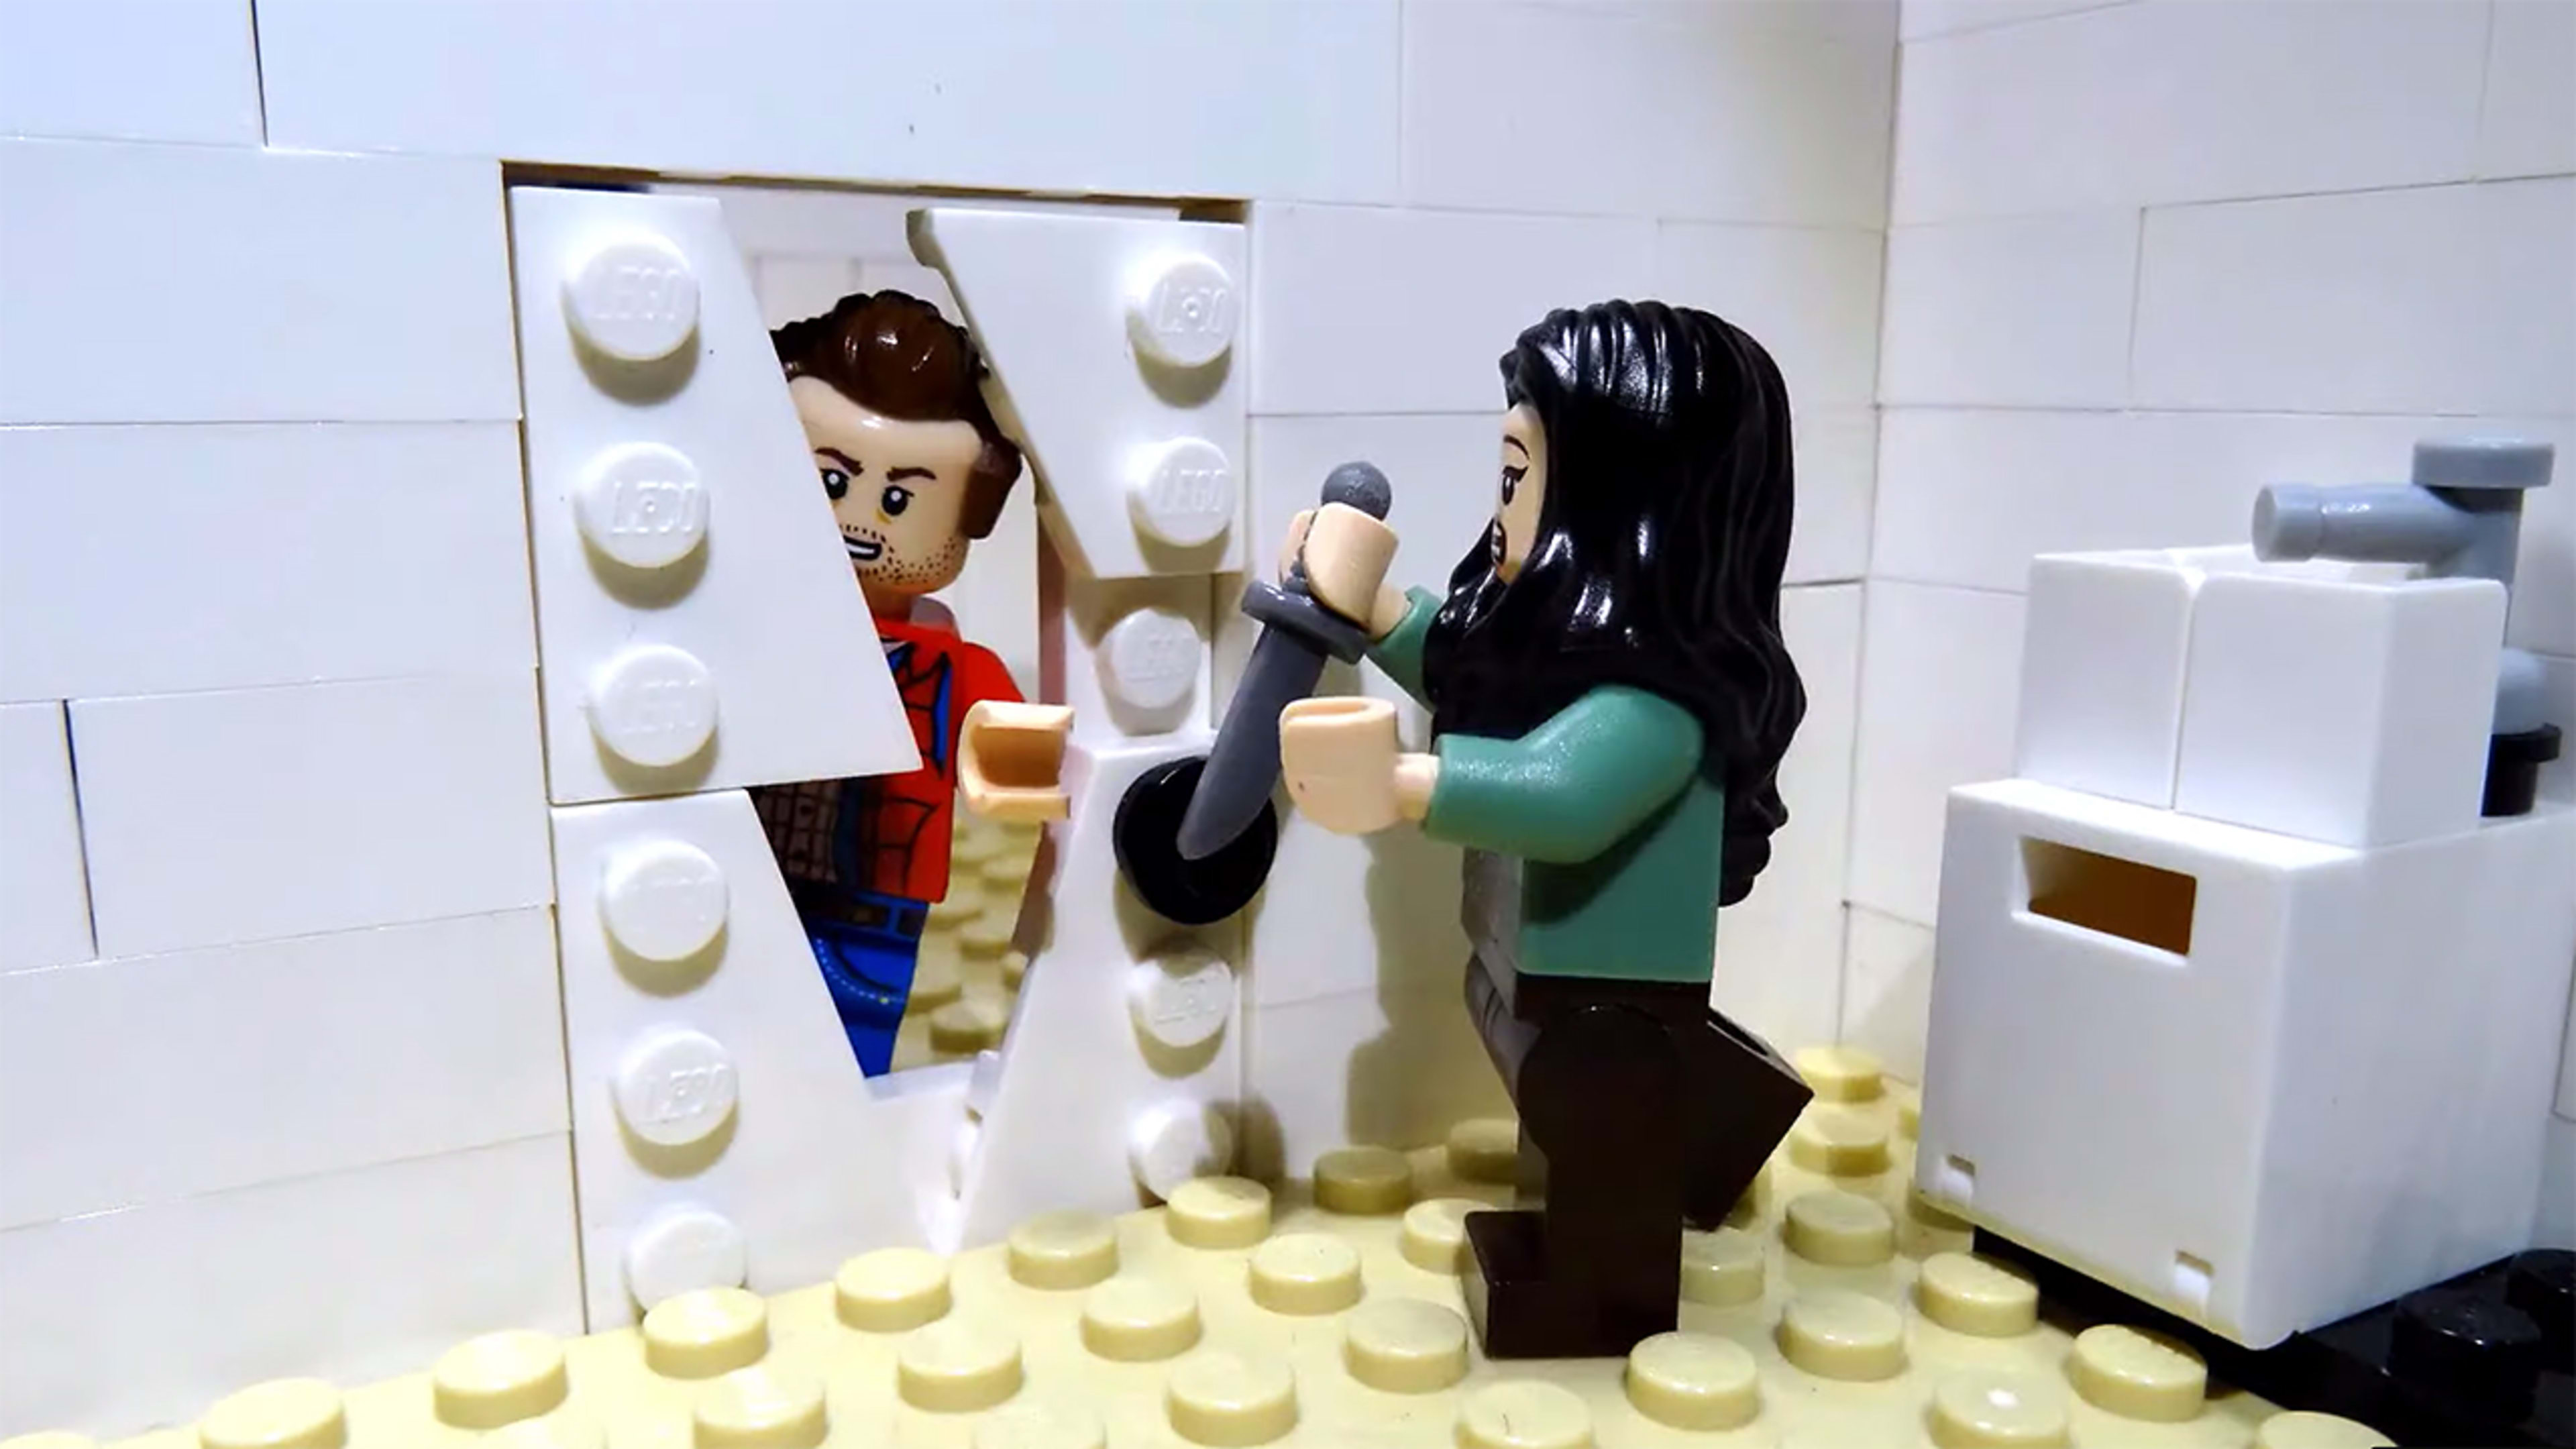 This fan-made, stop-motion ‘The Shining’ took 60 hours and 10,000 LEGOs to create